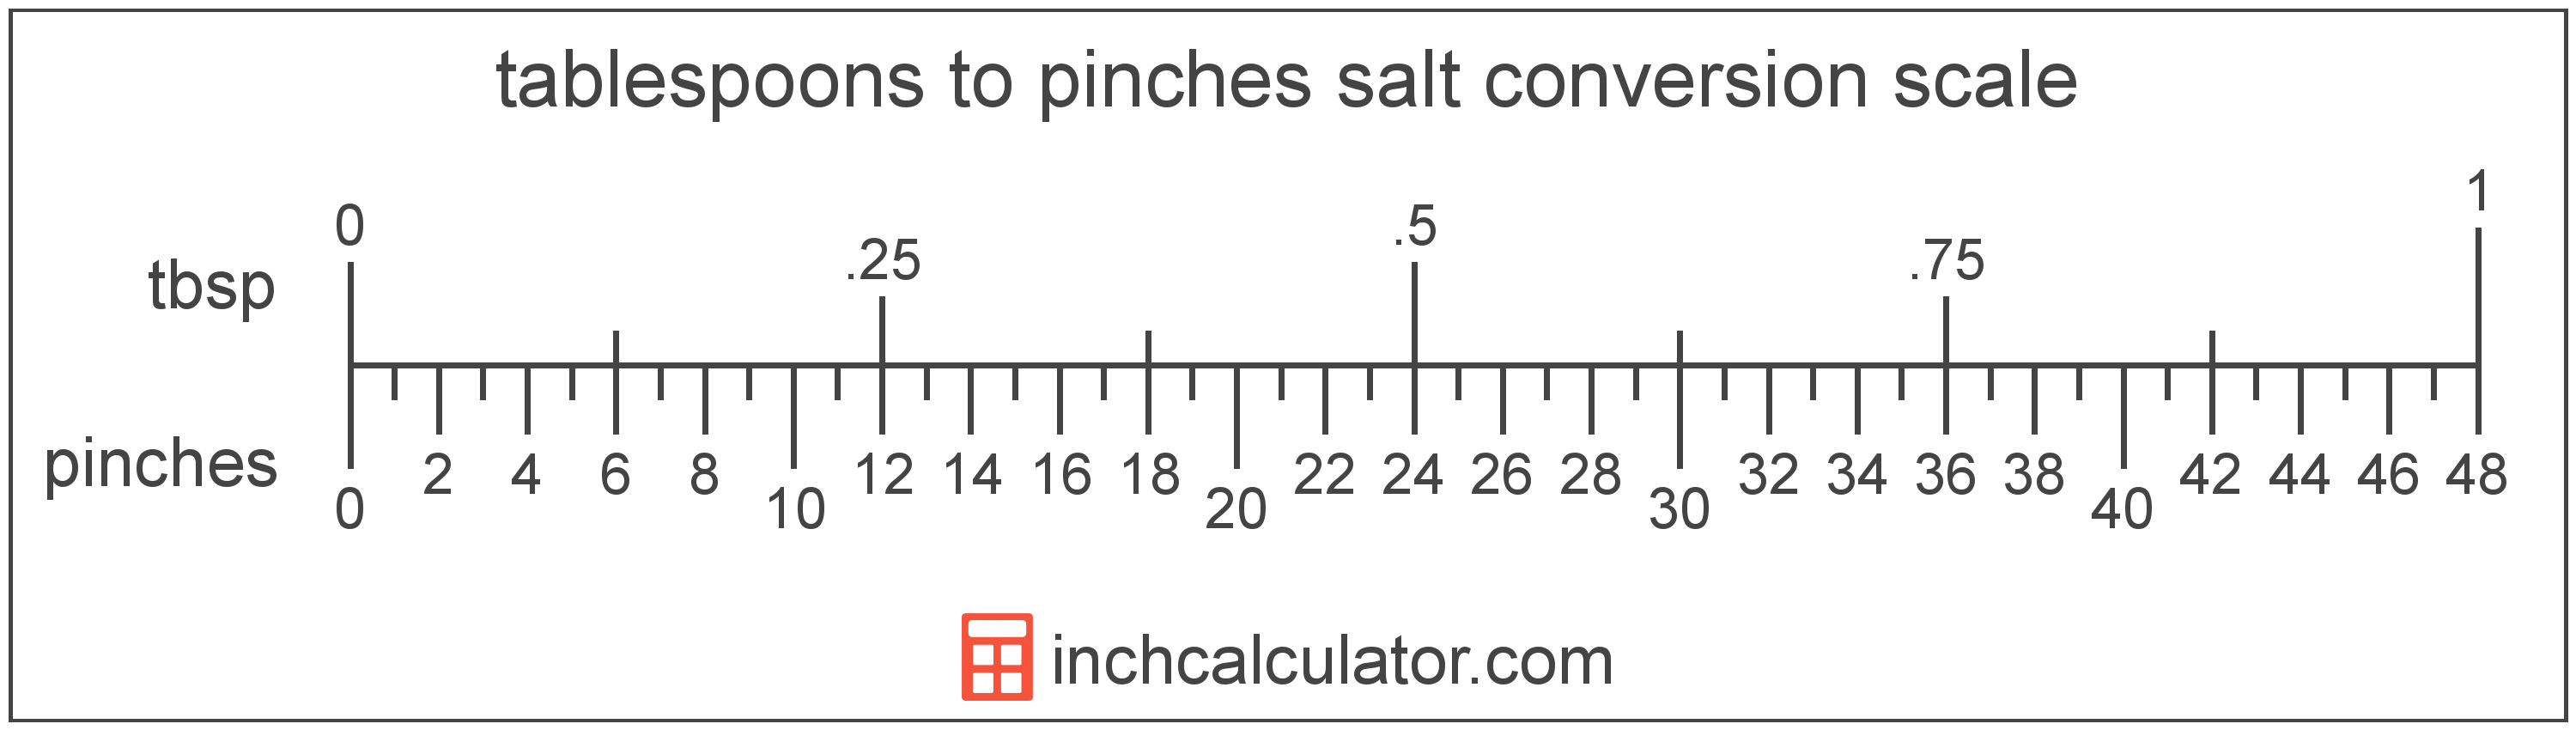 conversion scale showing tablespoons and equivalent pinches amount of salt values